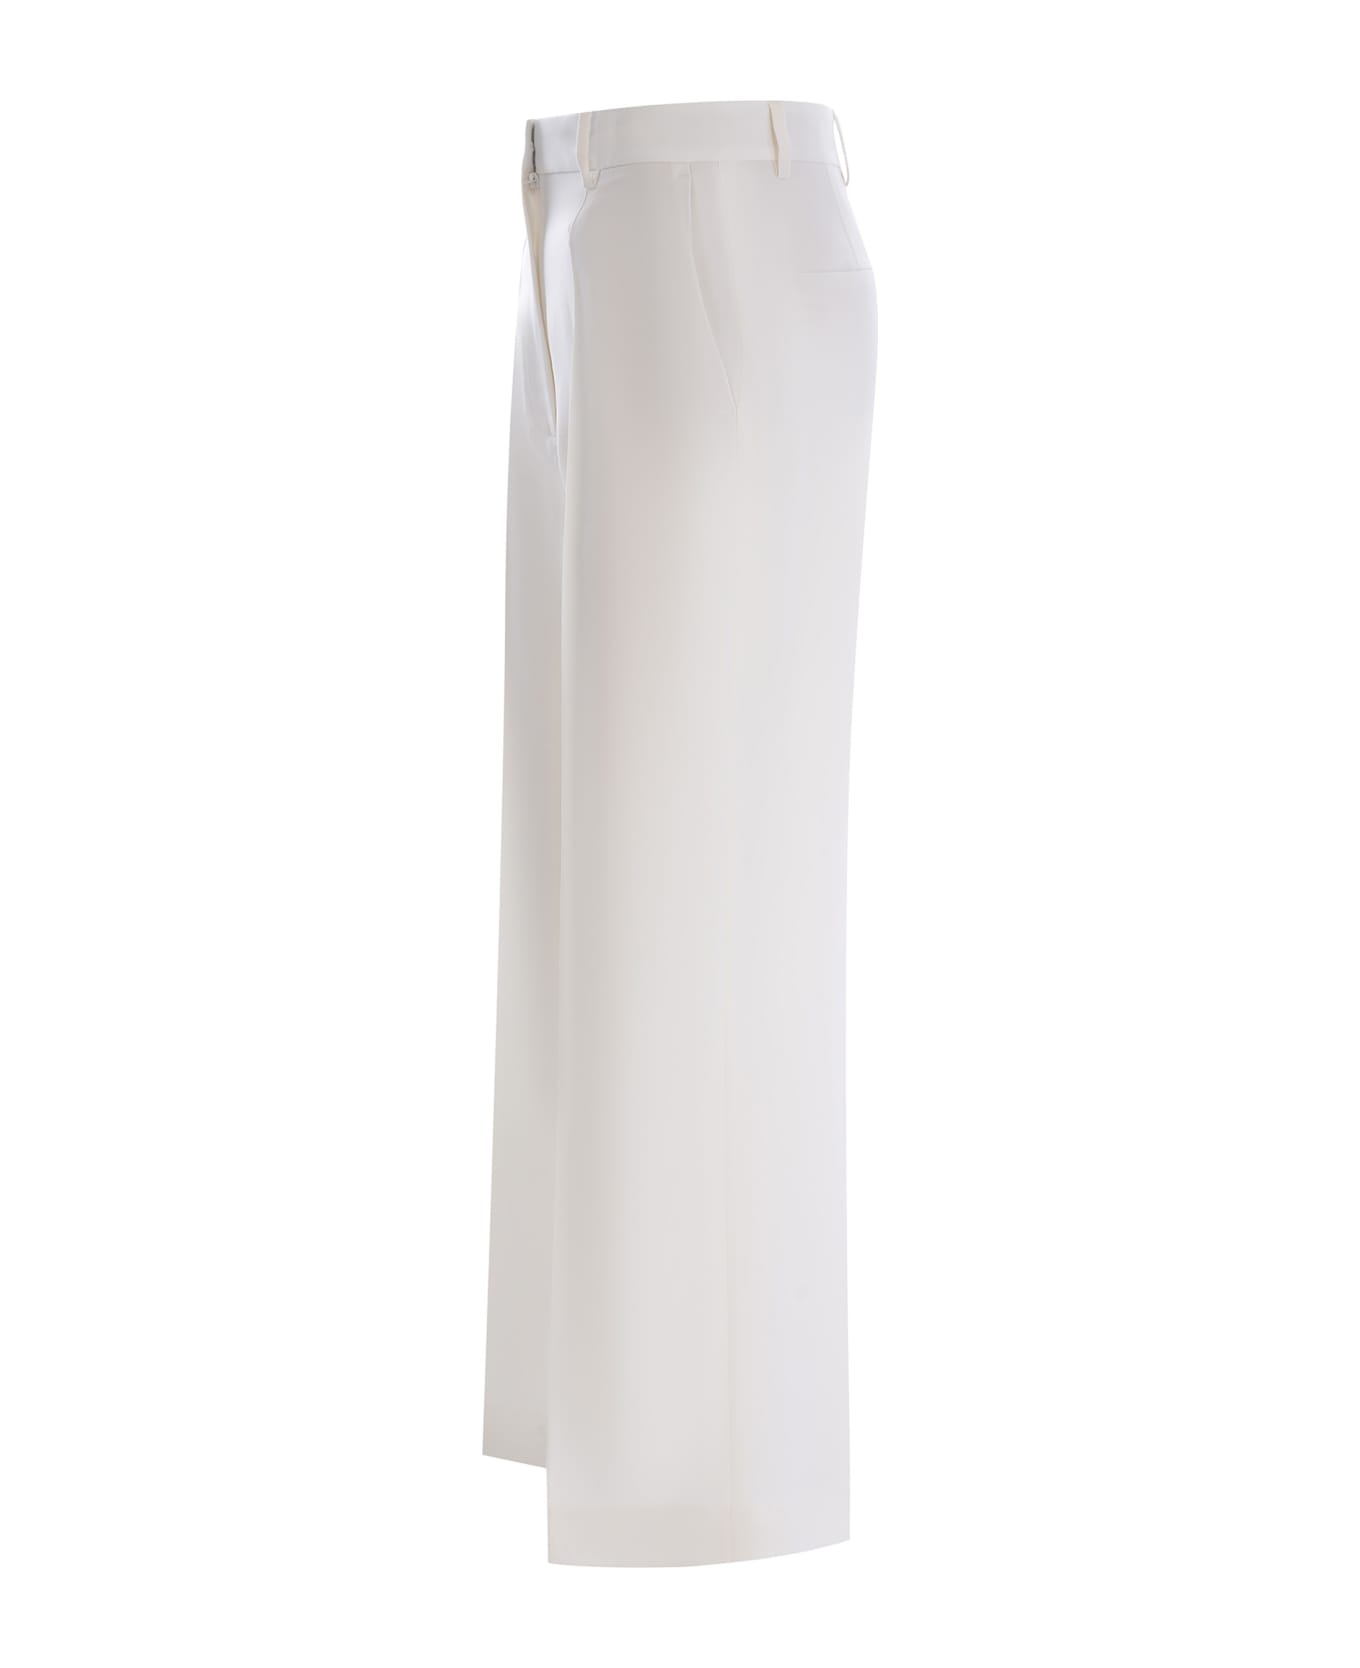 Manuel Ritz Trousers Manuel Ritz Made Of Wool Canvas - Off white